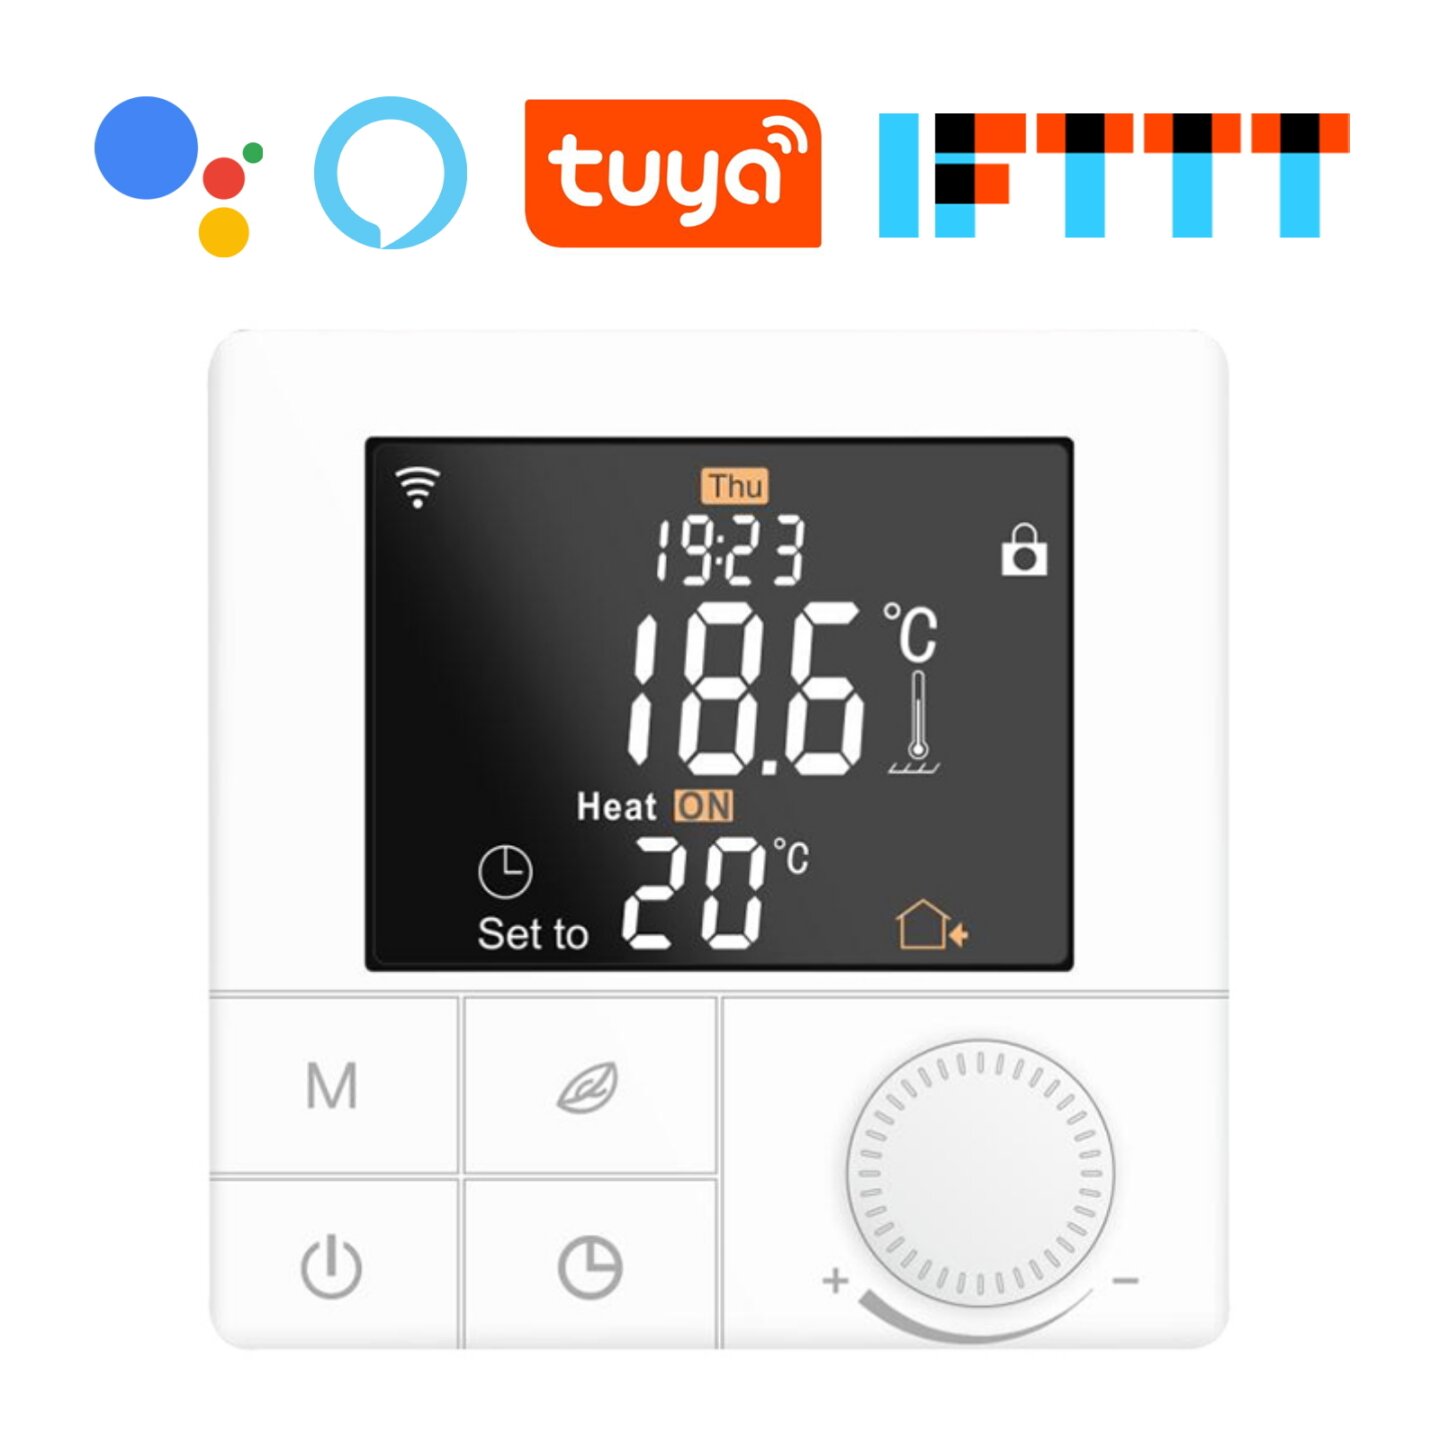 Smart thermostats can be controlled via Tuya Smart smartphone or tablet app